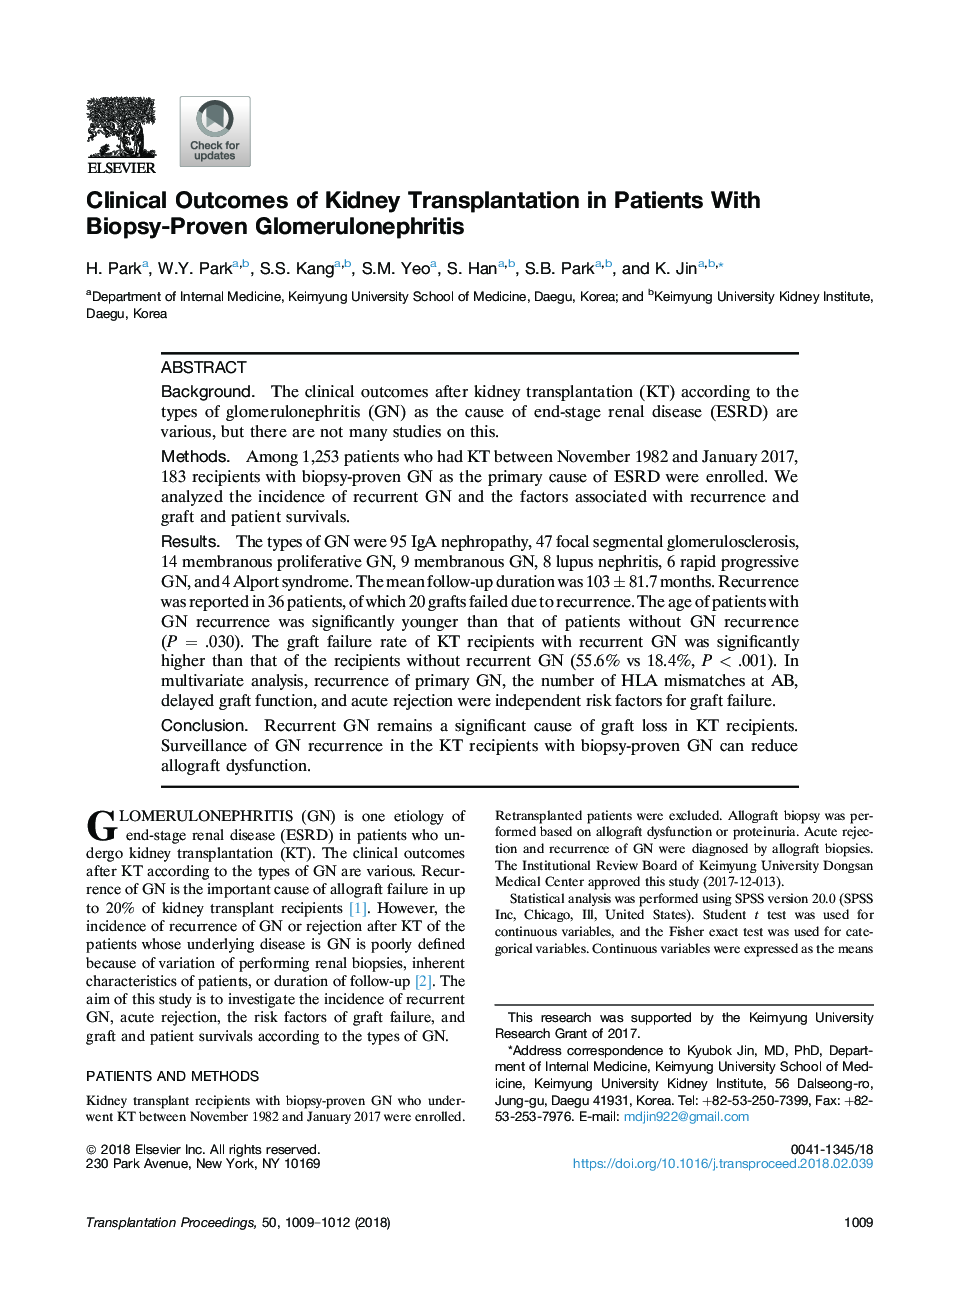 Clinical Outcomes of Kidney Transplantation in Patients With Biopsy-Proven Glomerulonephritis